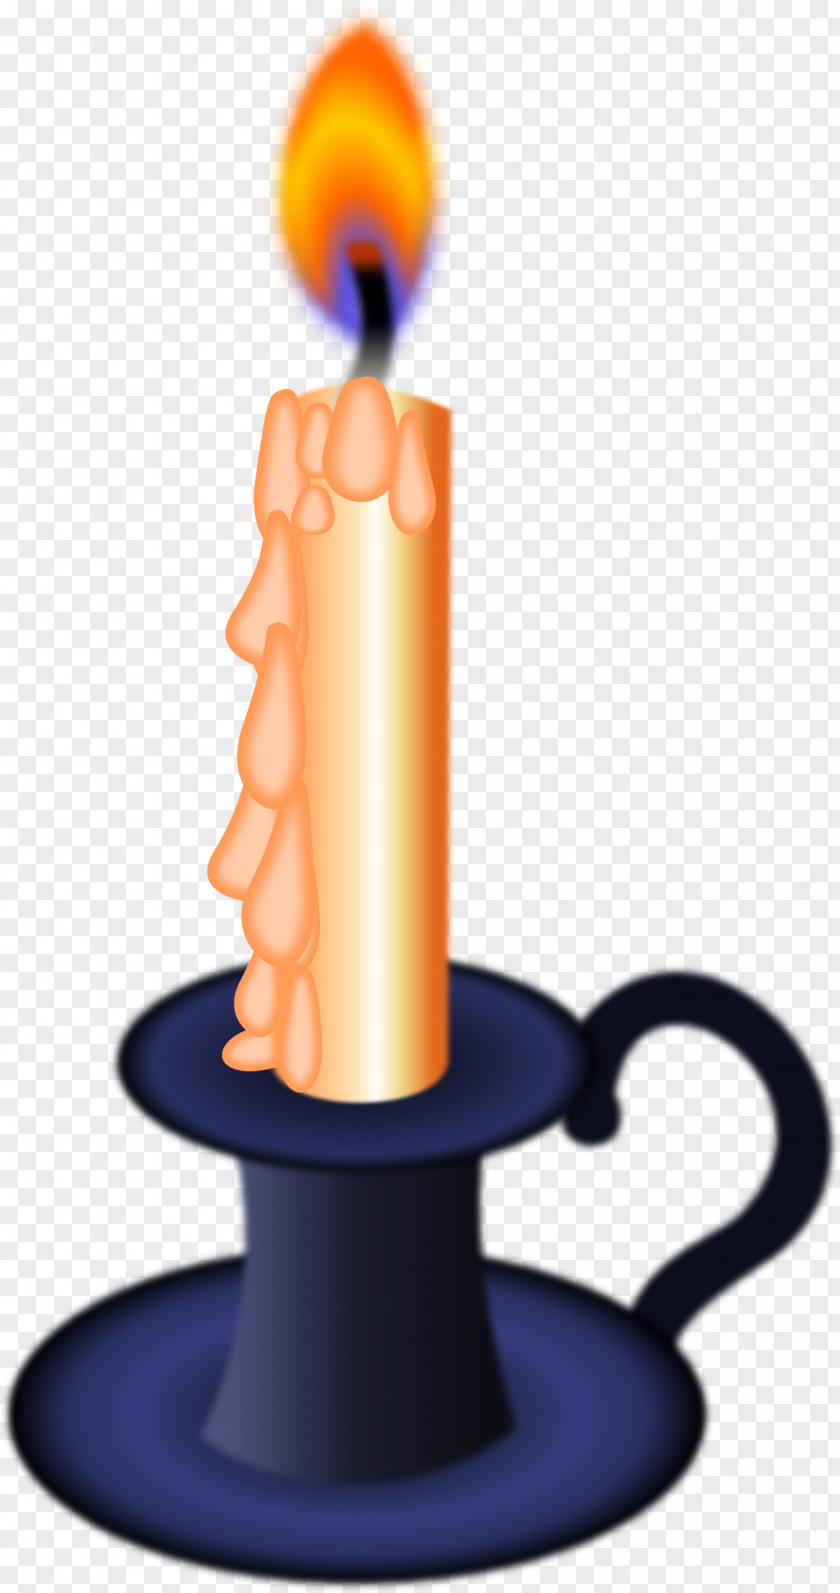 Halloween Candles Cliparts Birthday Cake Paschal Candle Clip Art PNG